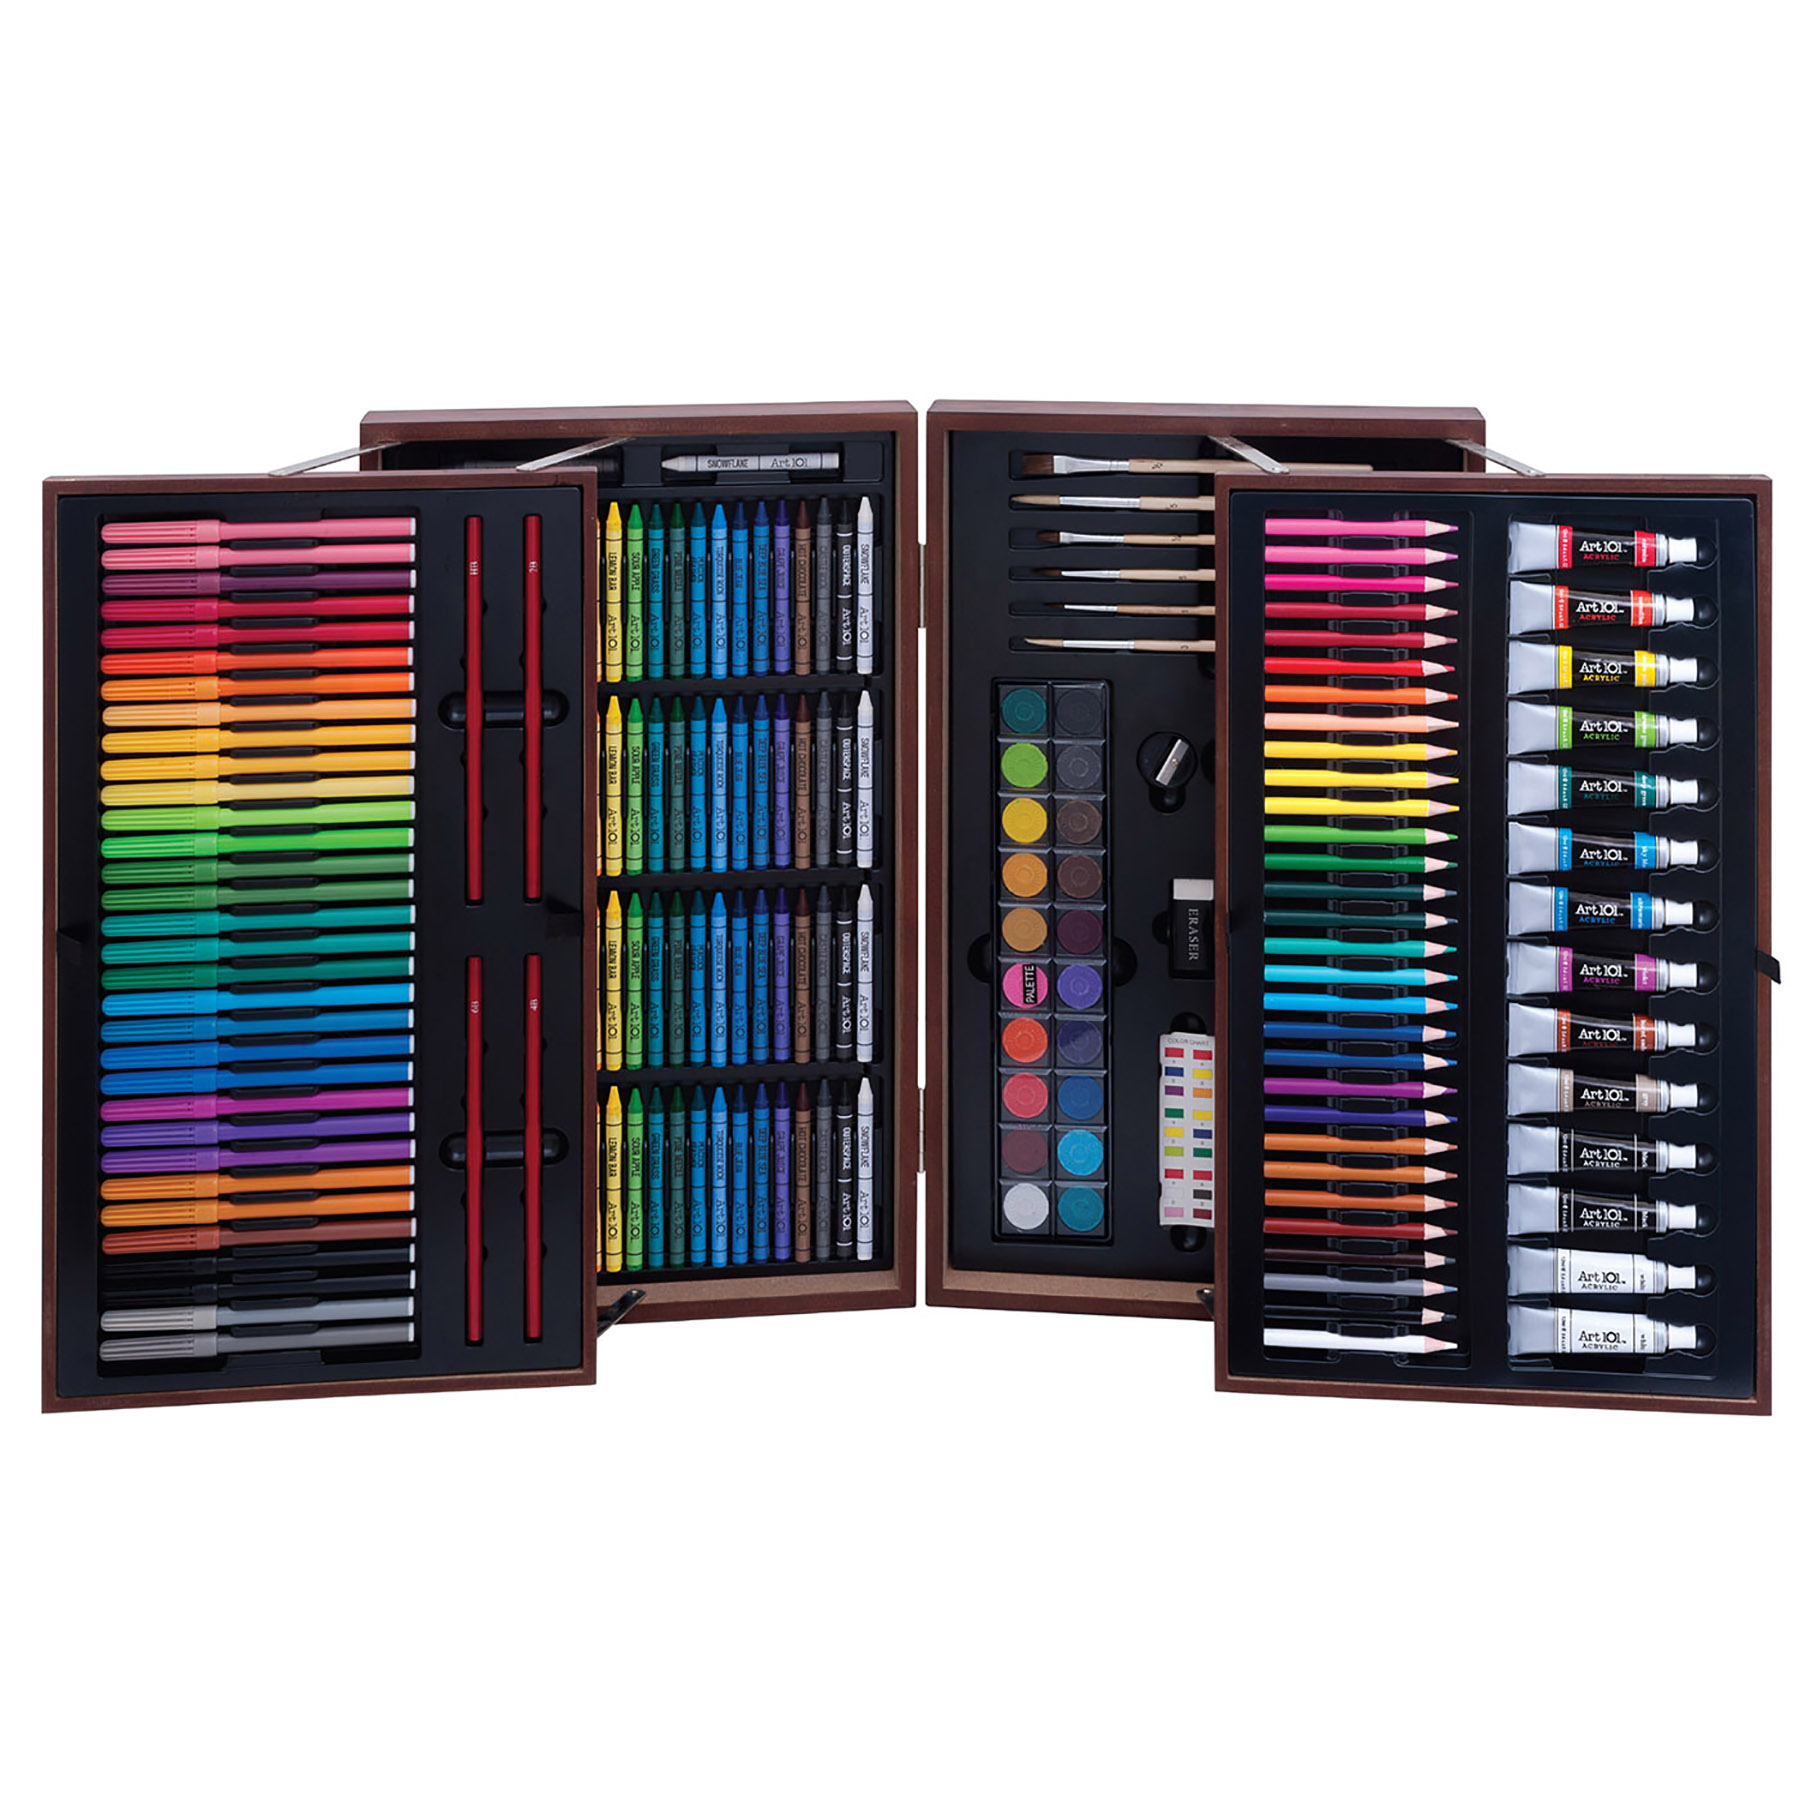 Art 101 Deluxe Artist Wood Set, 215 Pieces image number null